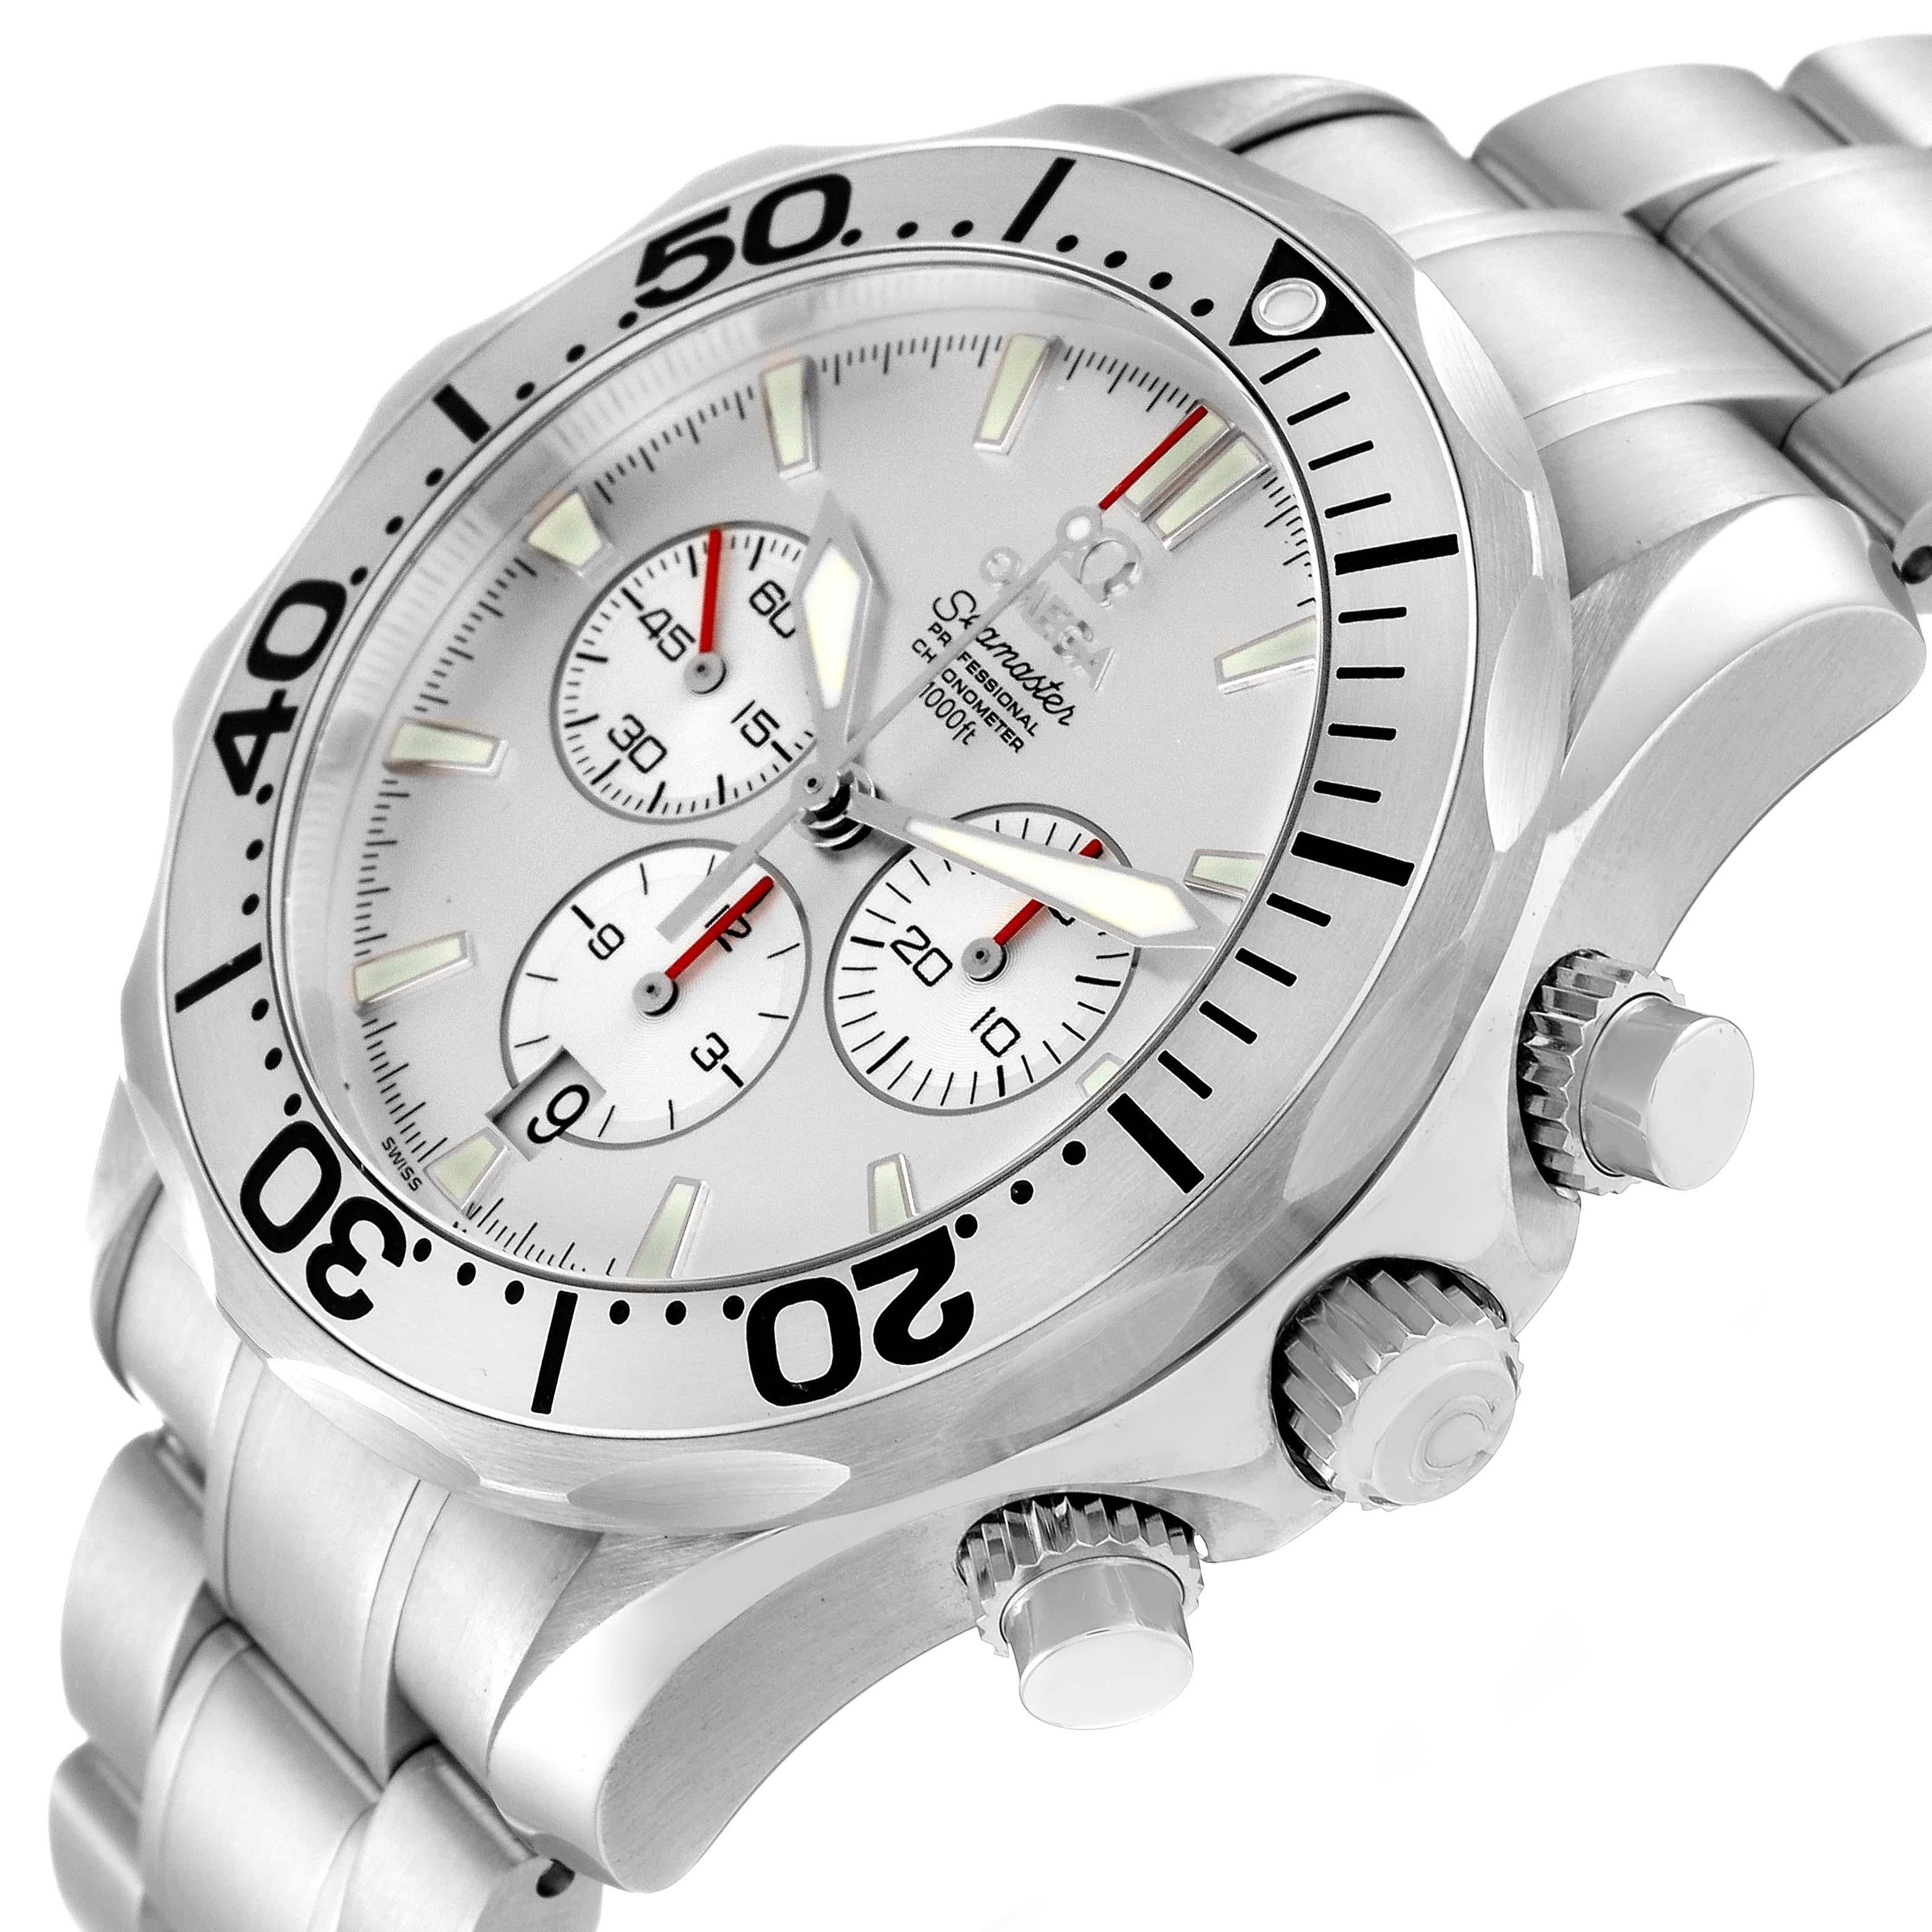 Omega Seamaster Special Edition Chronograph Watch 2589.30.00 Box Card For Sale 1